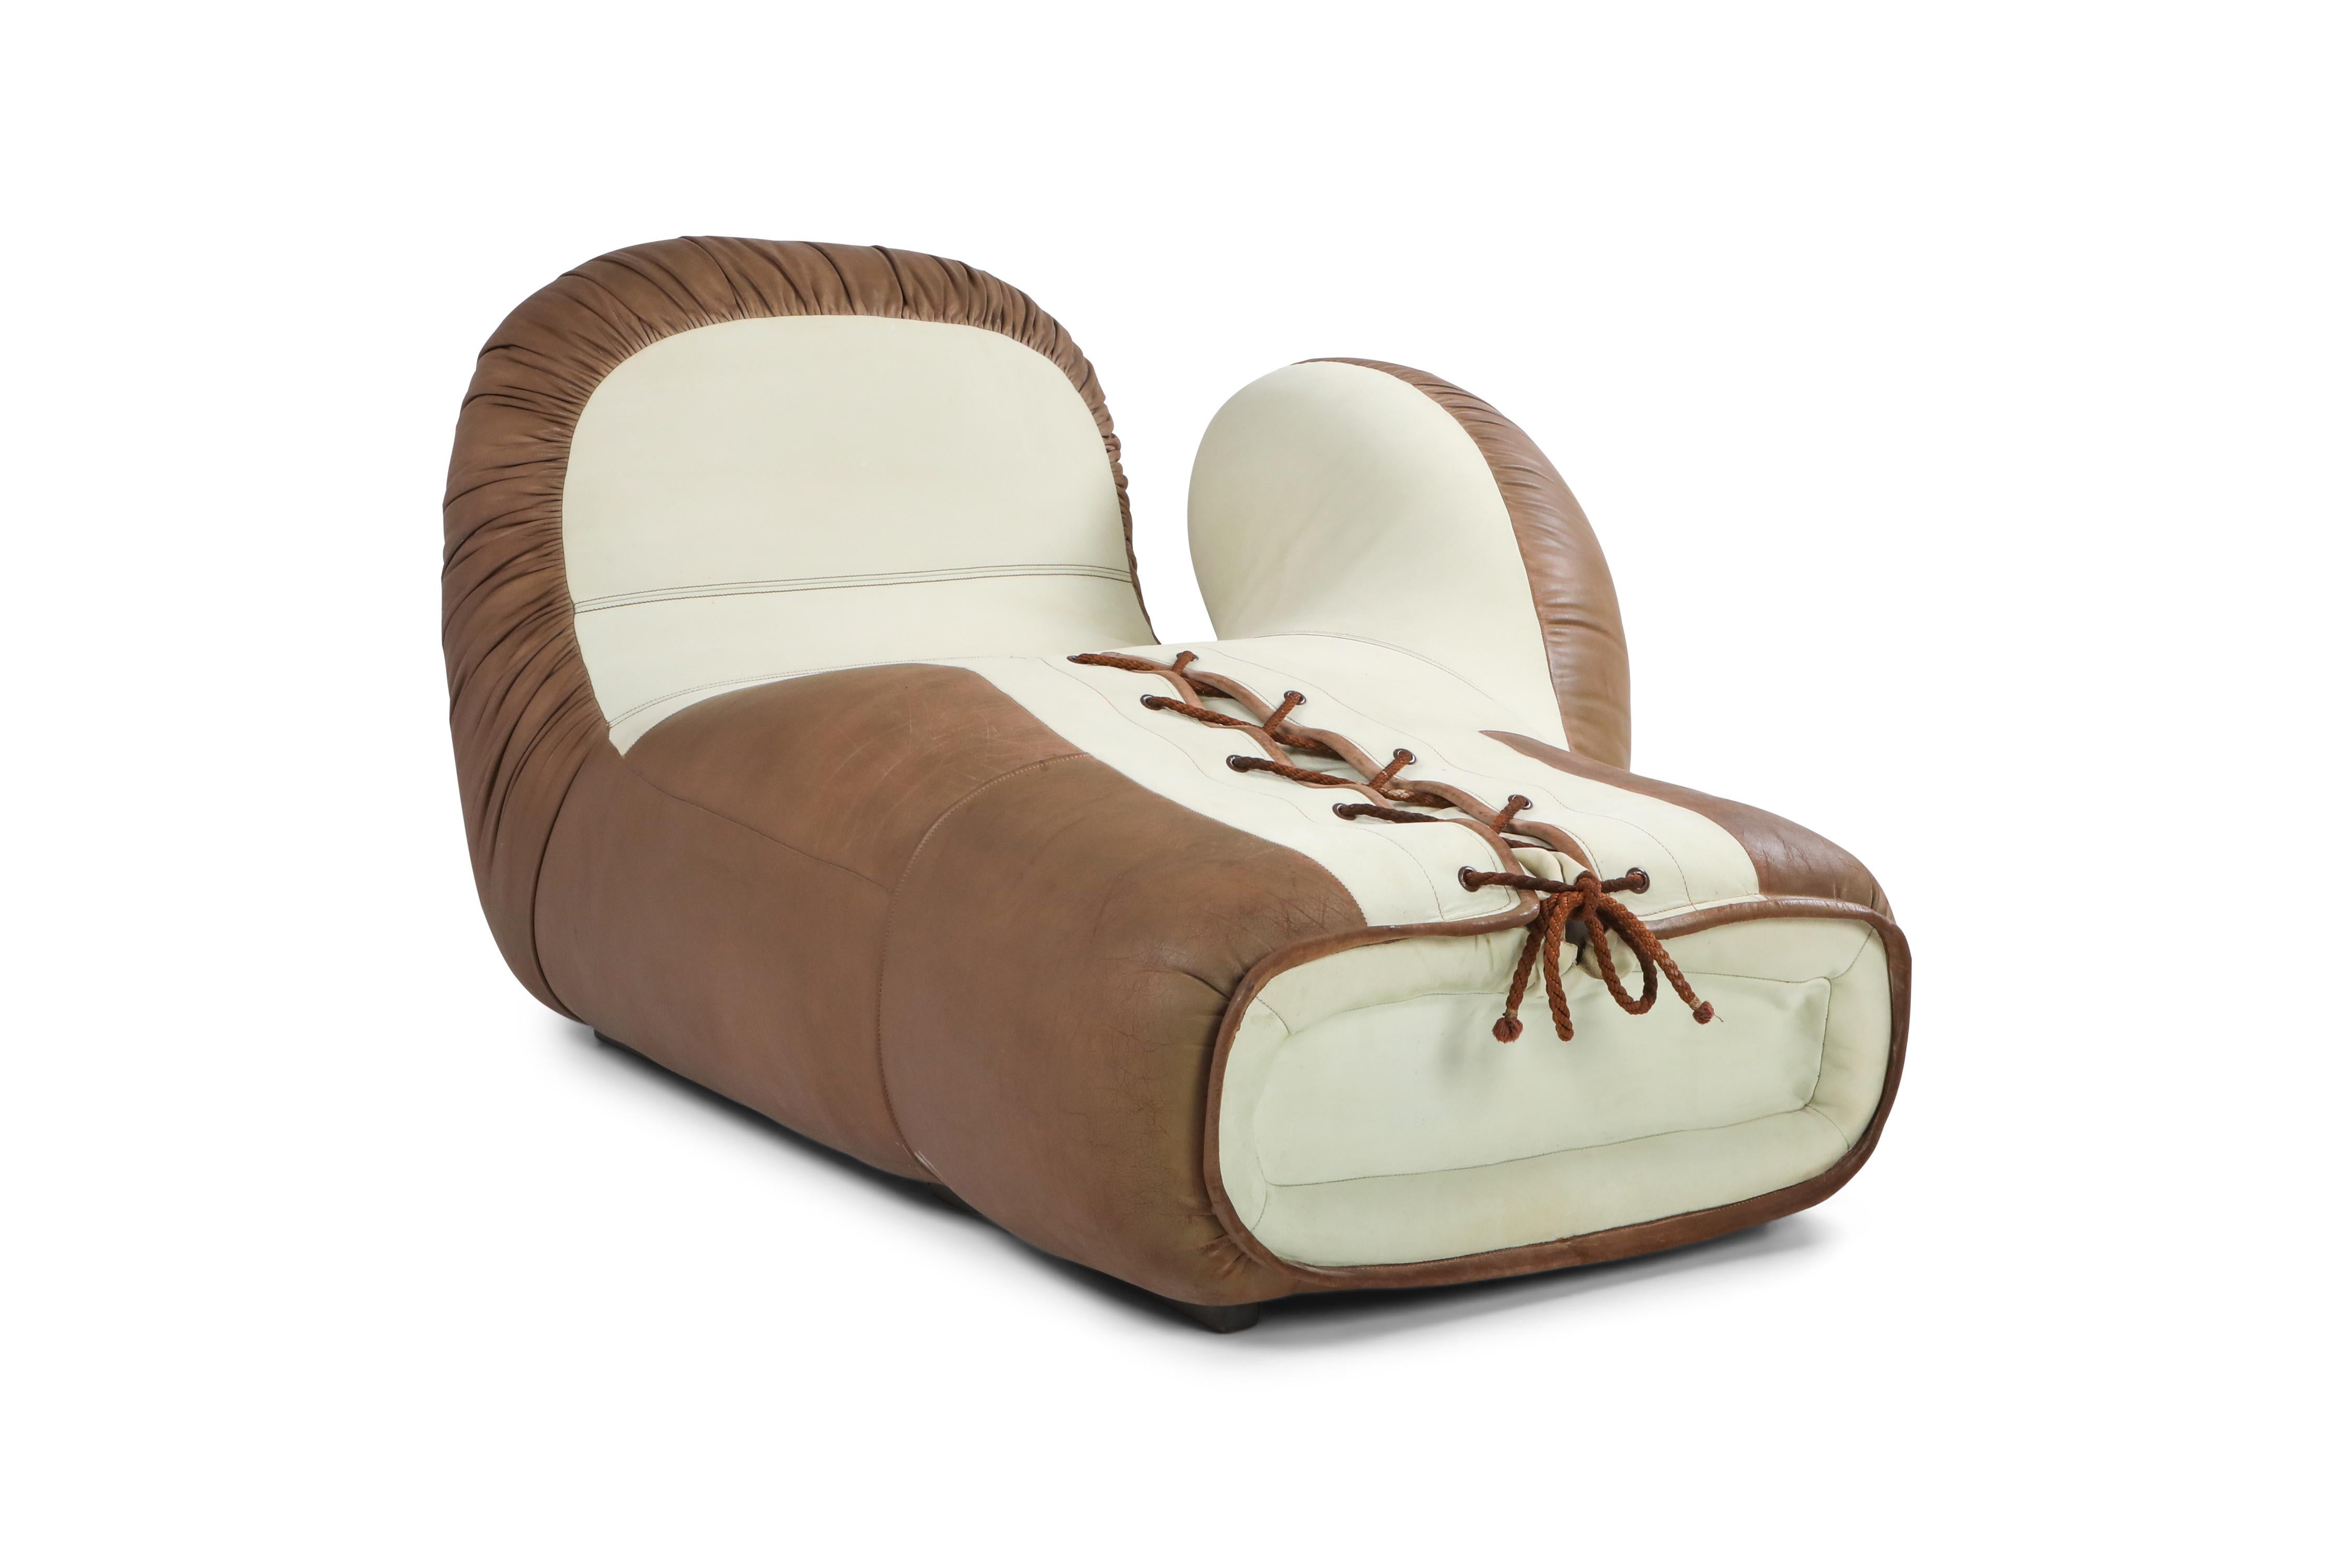 Boxing Glove Sectional Sofa, DS-2878 by De Sede, Switzerland 1